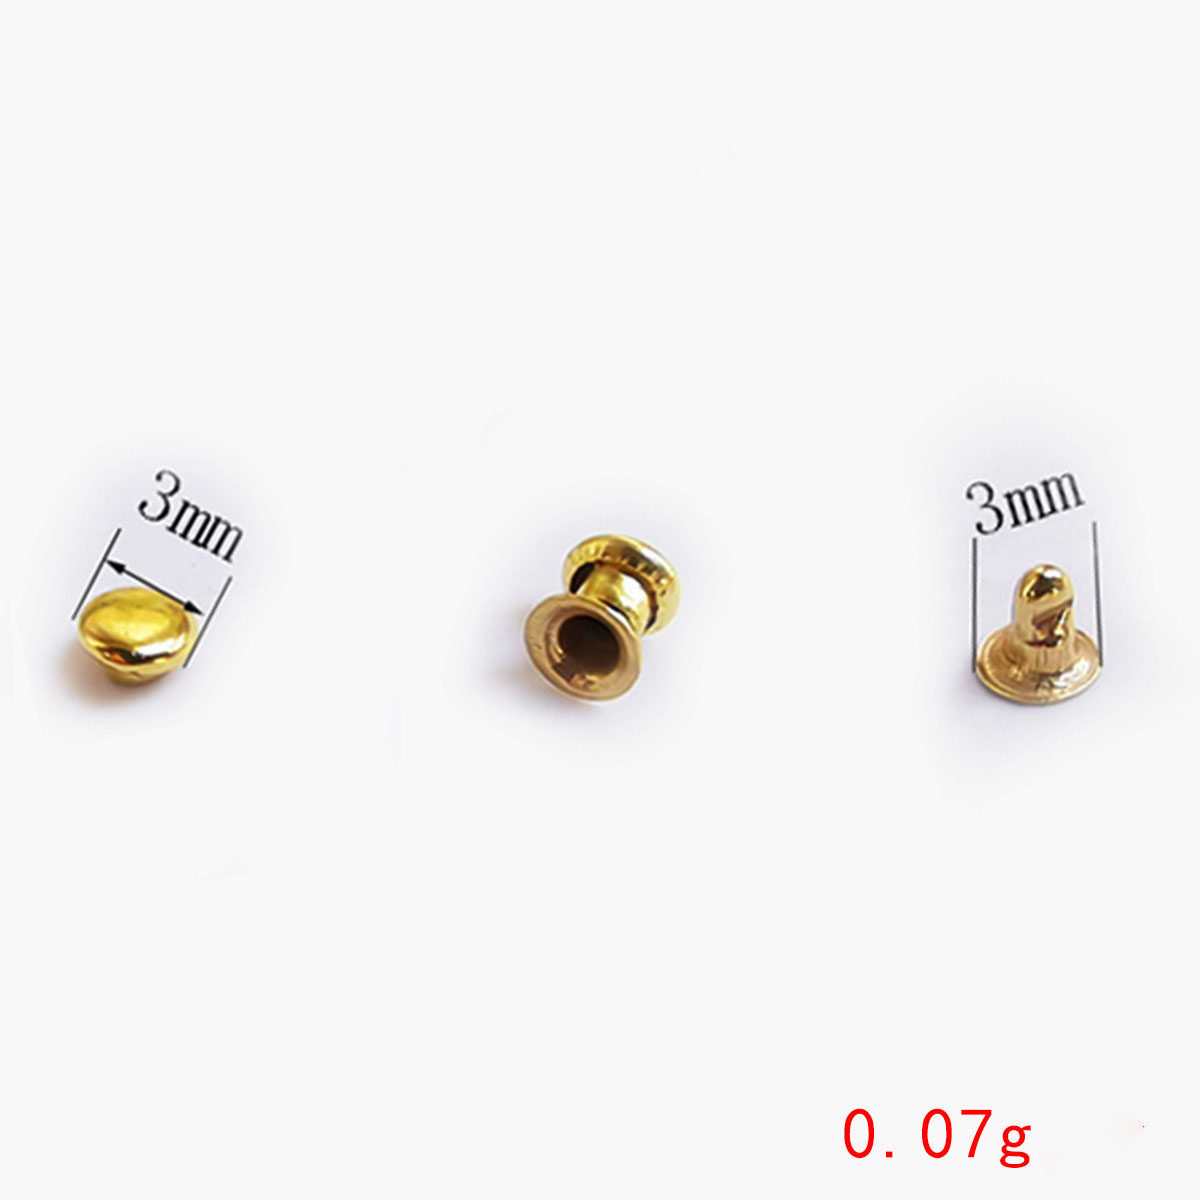 7:4mm gold